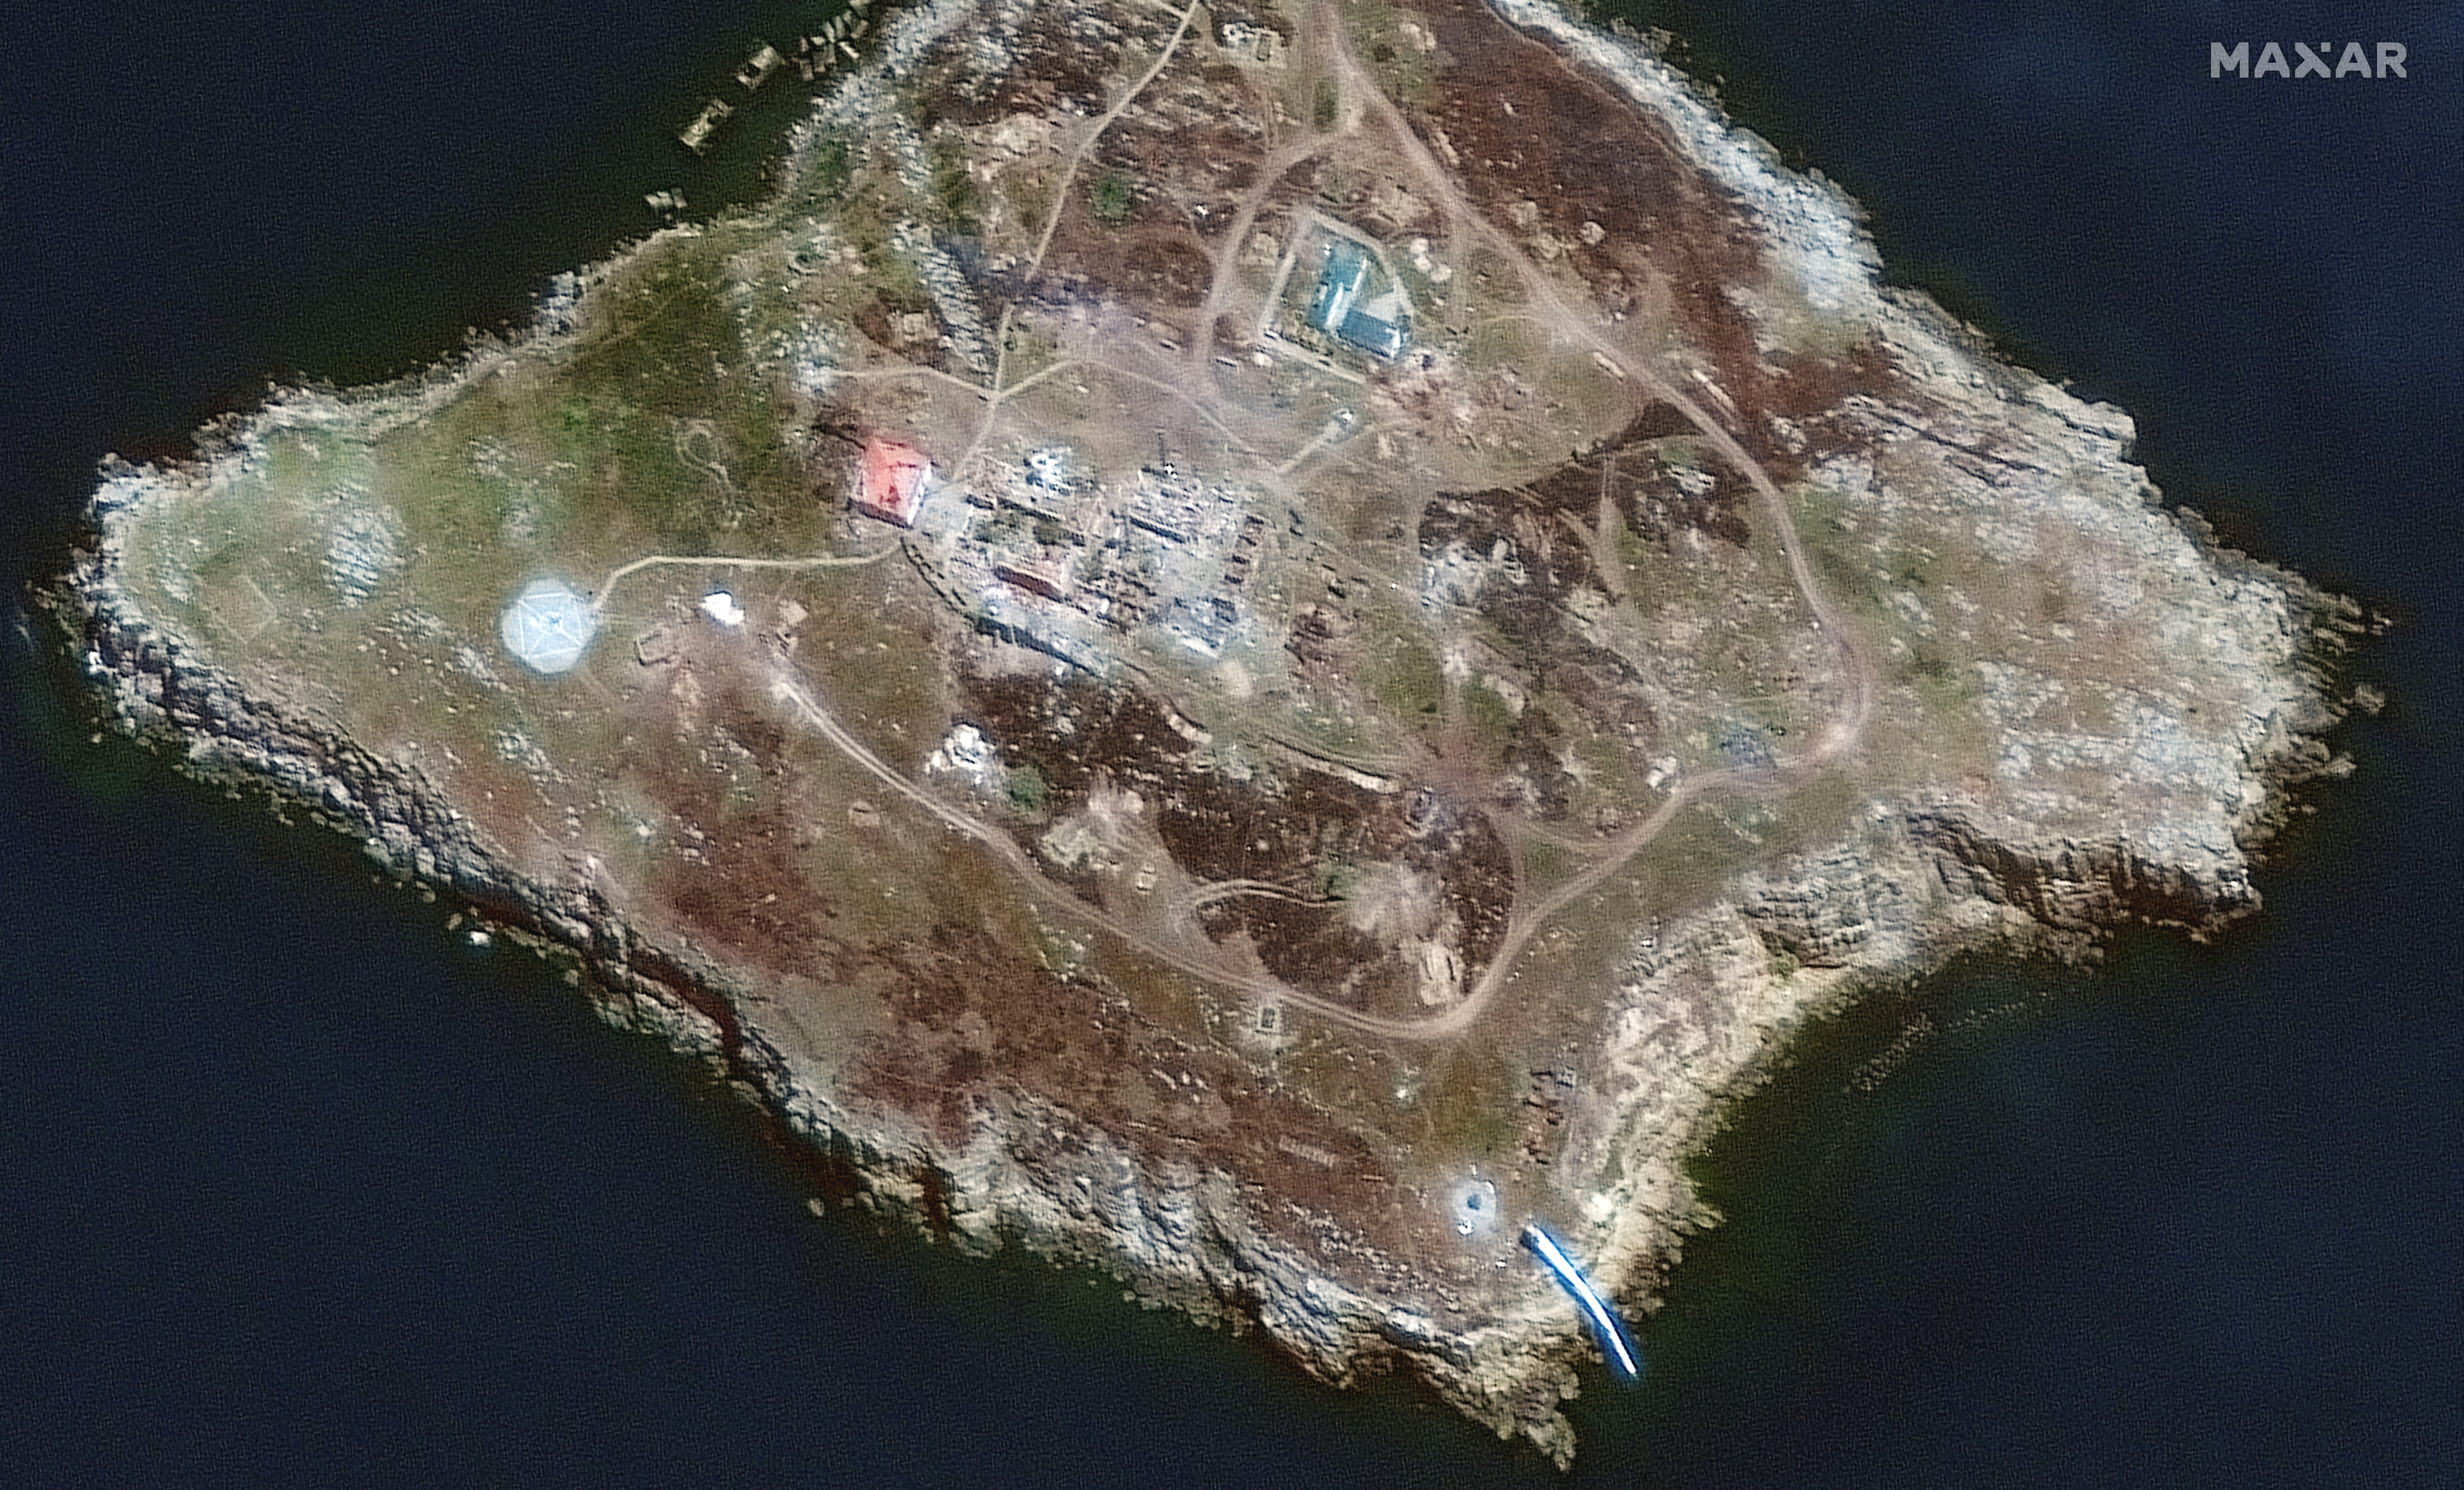 A satellite image shows the southern end of Snake Island